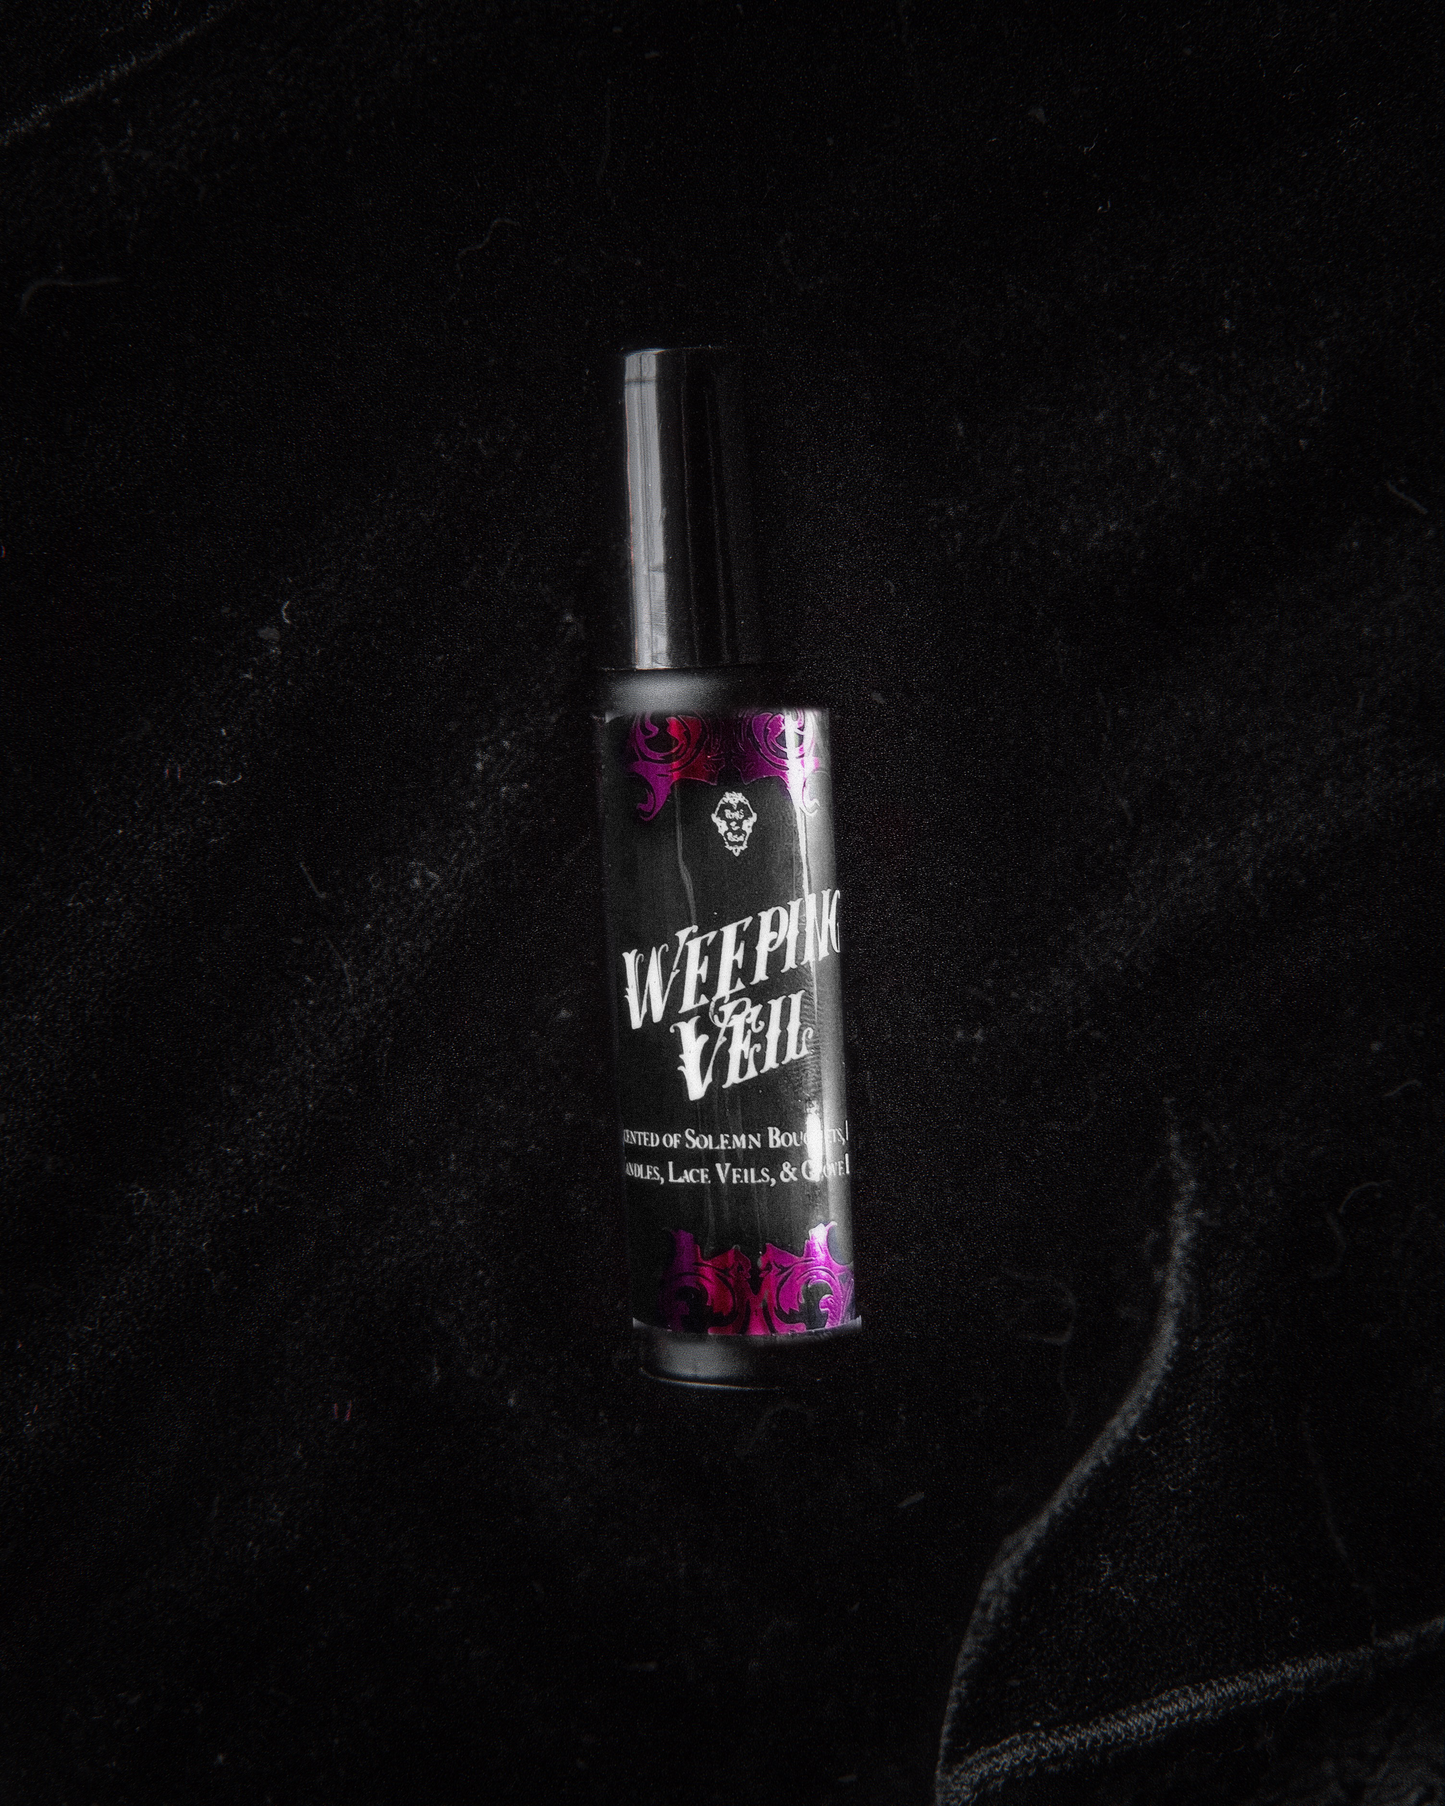 The "Weeping Veil” Roll On Perfume